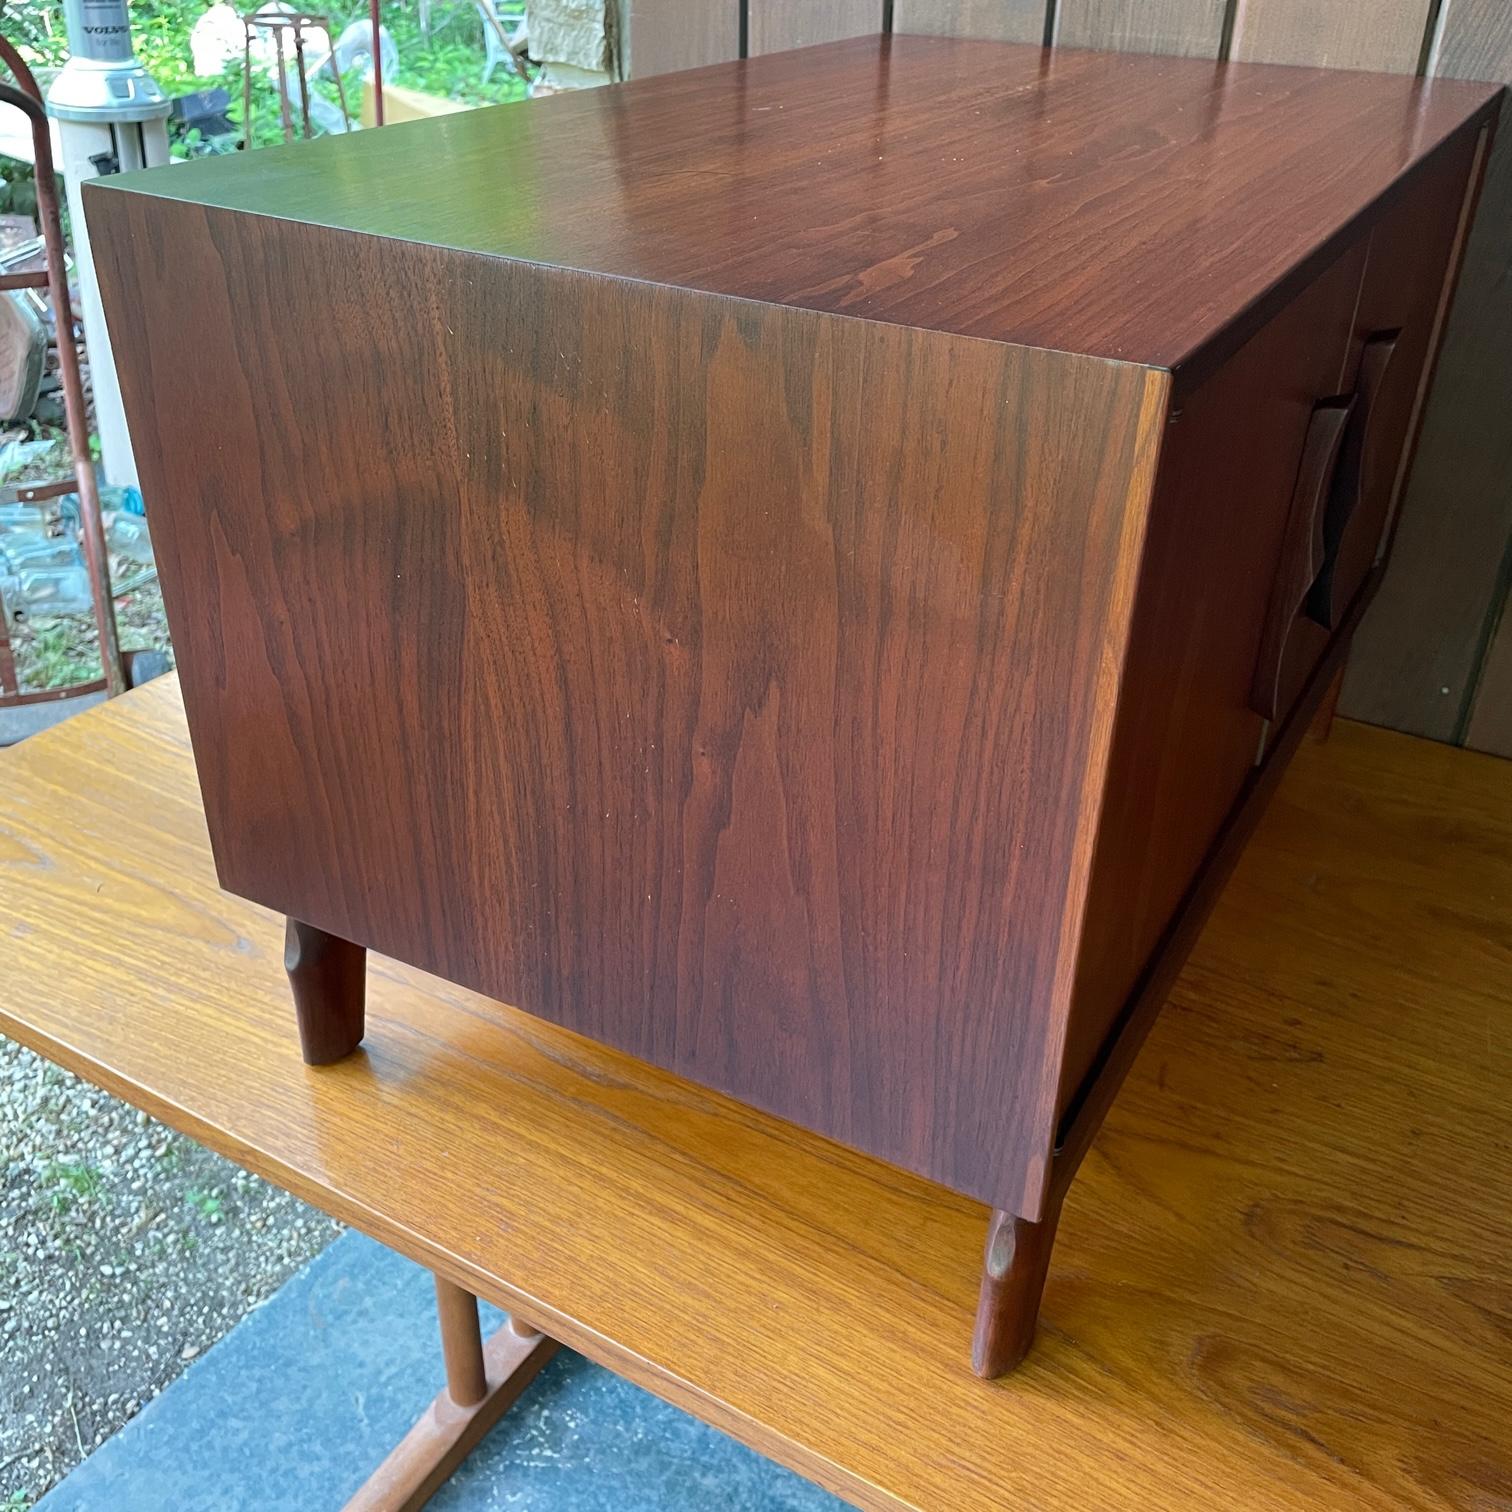 1950s Walnut Record Hi-Fi Cabinet Sofa Table Black Forest Vintage Mid-Century In Good Condition For Sale In Hyattsville, MD